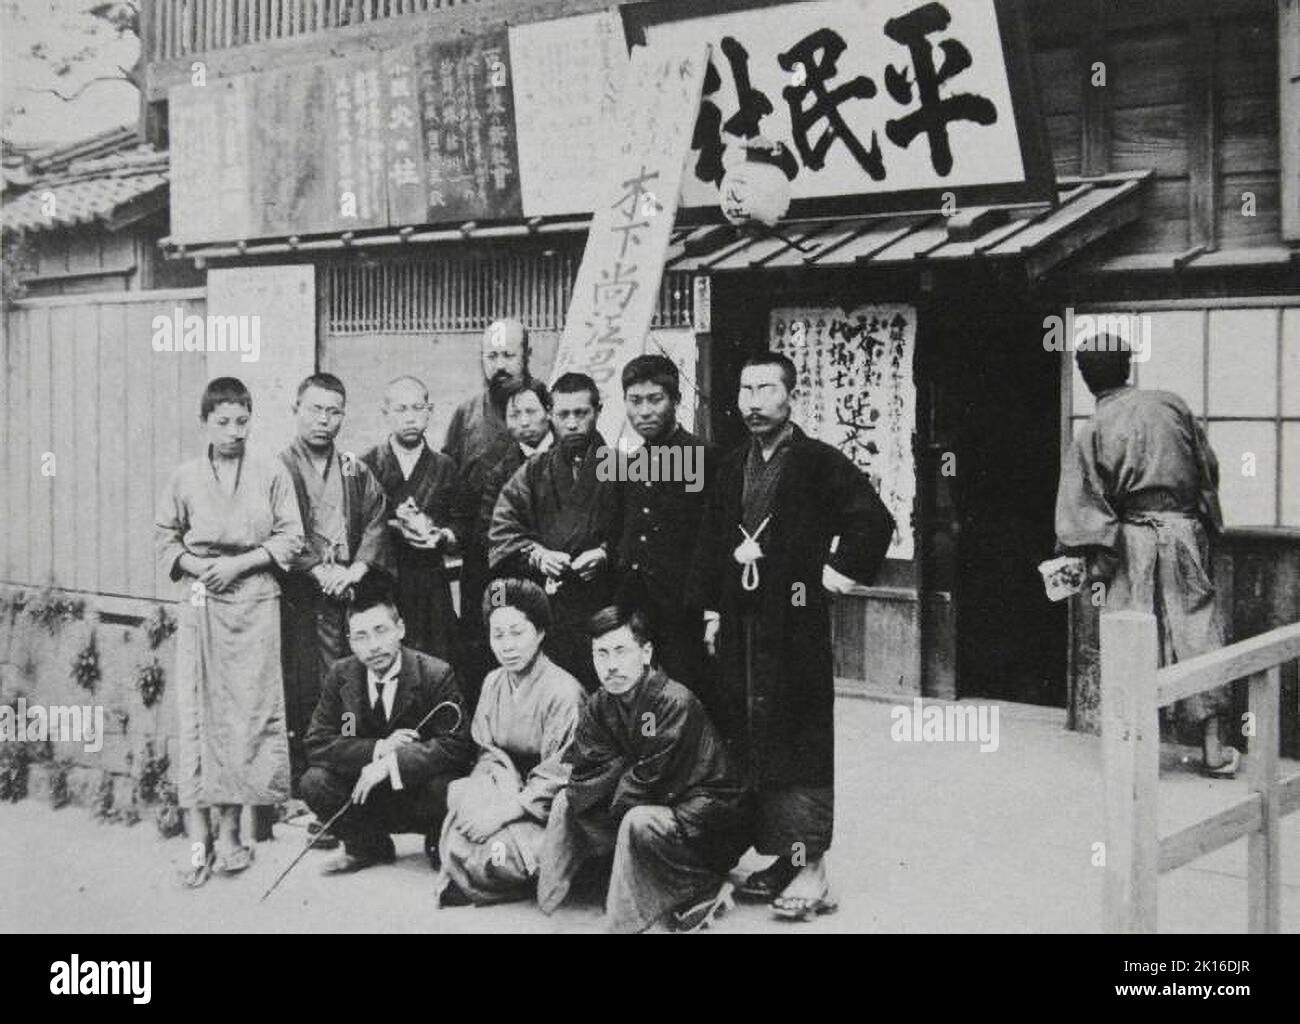 Group photo of Heimin-sha, in front of their office, Tokyo, Japan, 1905. Sakai Toshihiko (left 2), Kinoshita Naoe (right 1) are seen. They published newspaper 'Heimin Shimbun (The Commoner's News)' from 1903 to 1905. They insisted on pacifism and promoted to spread socialist thoughts. Stock Photo